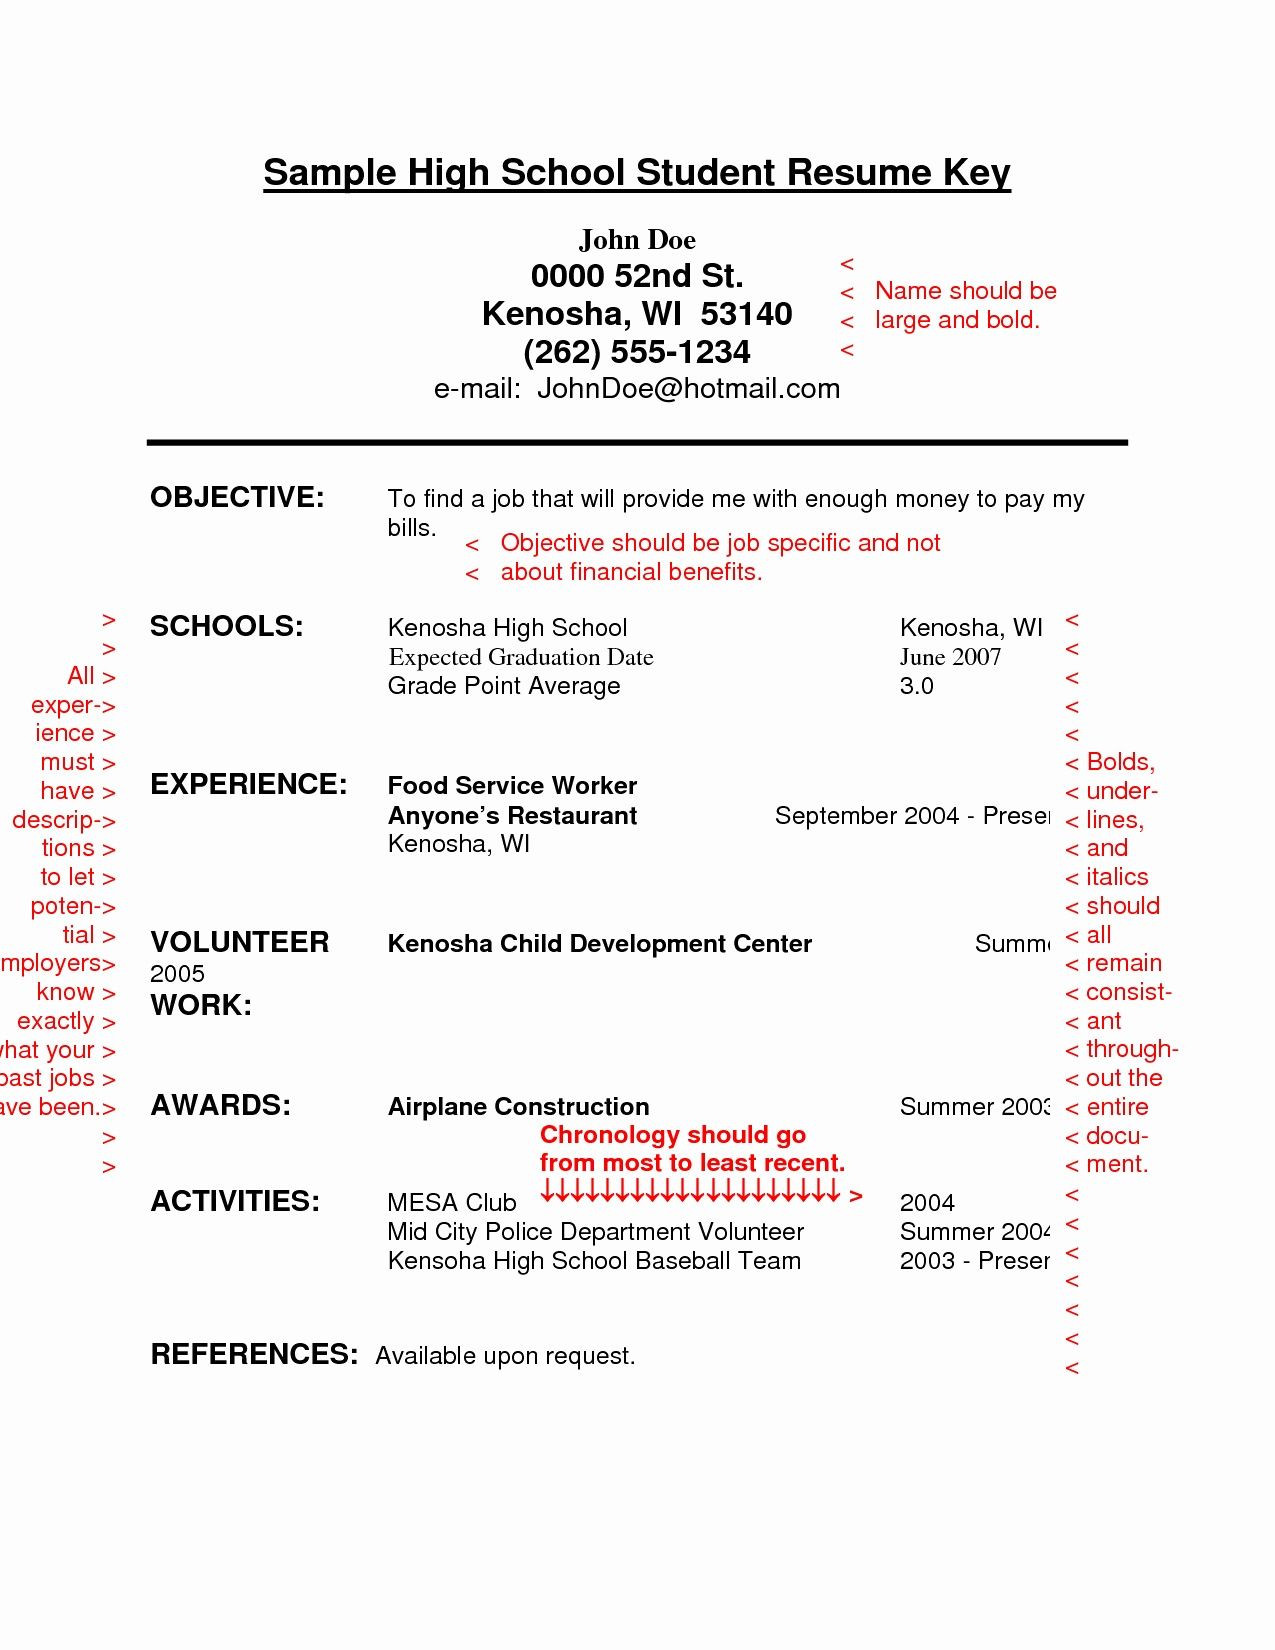 Resume Samples for A High School Student Writing A Resume for High School Students – Undergraduate …